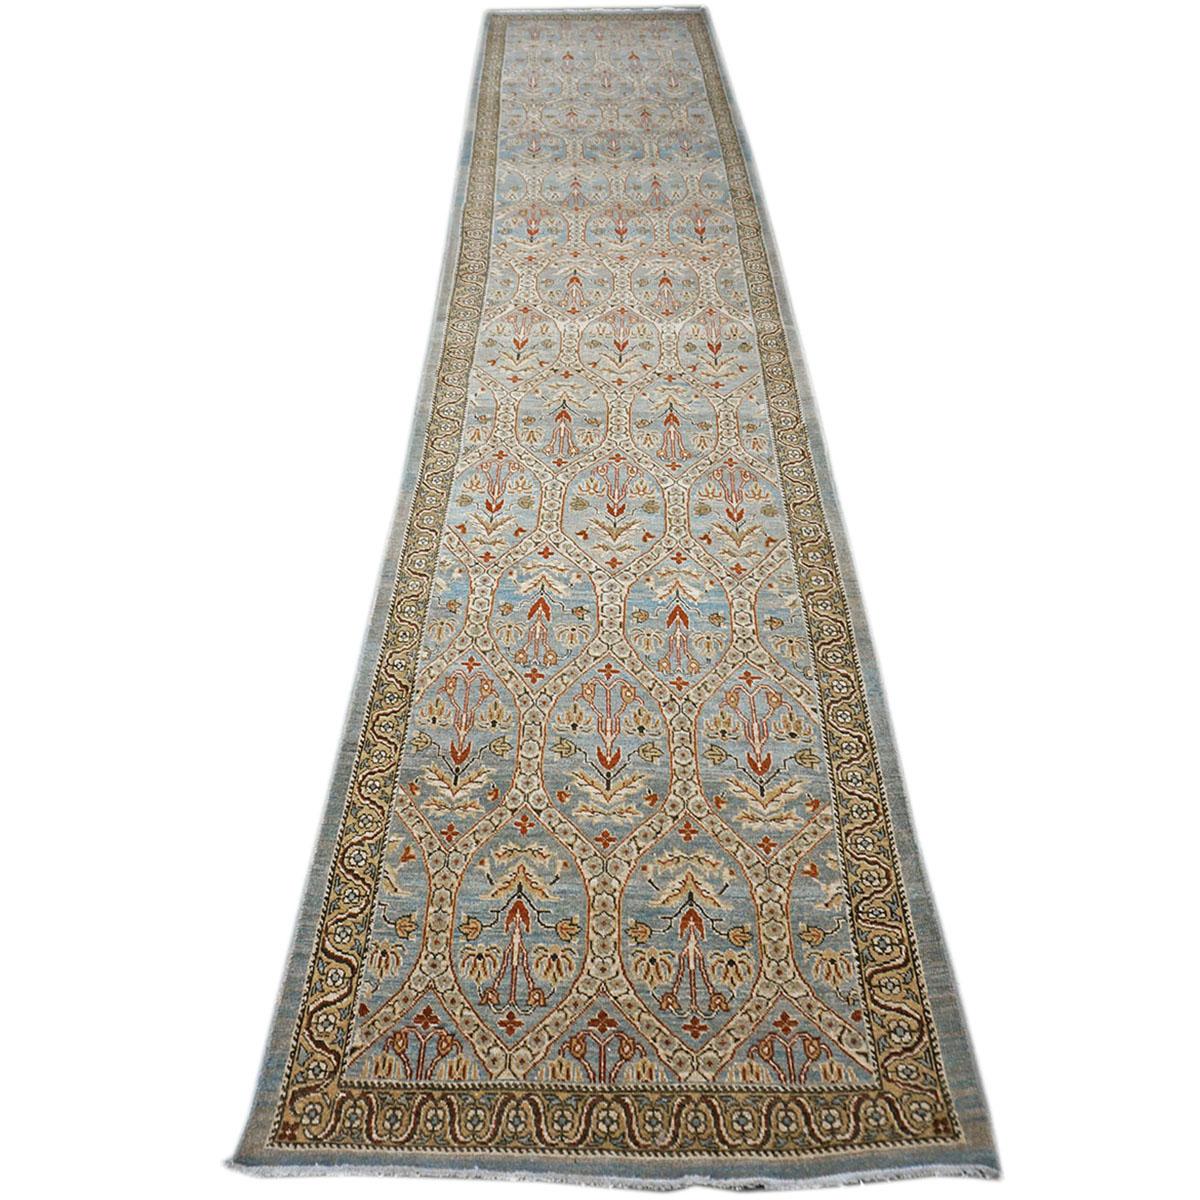 Ashly Fine Rugs presents a New Persian Tabriz 3x15 blue and ivory hall runner area rug. Tabriz is a northern city in modern-day Iran and has forever been famous for the fineness of its handmade rugs. This piece has a light blue colored background